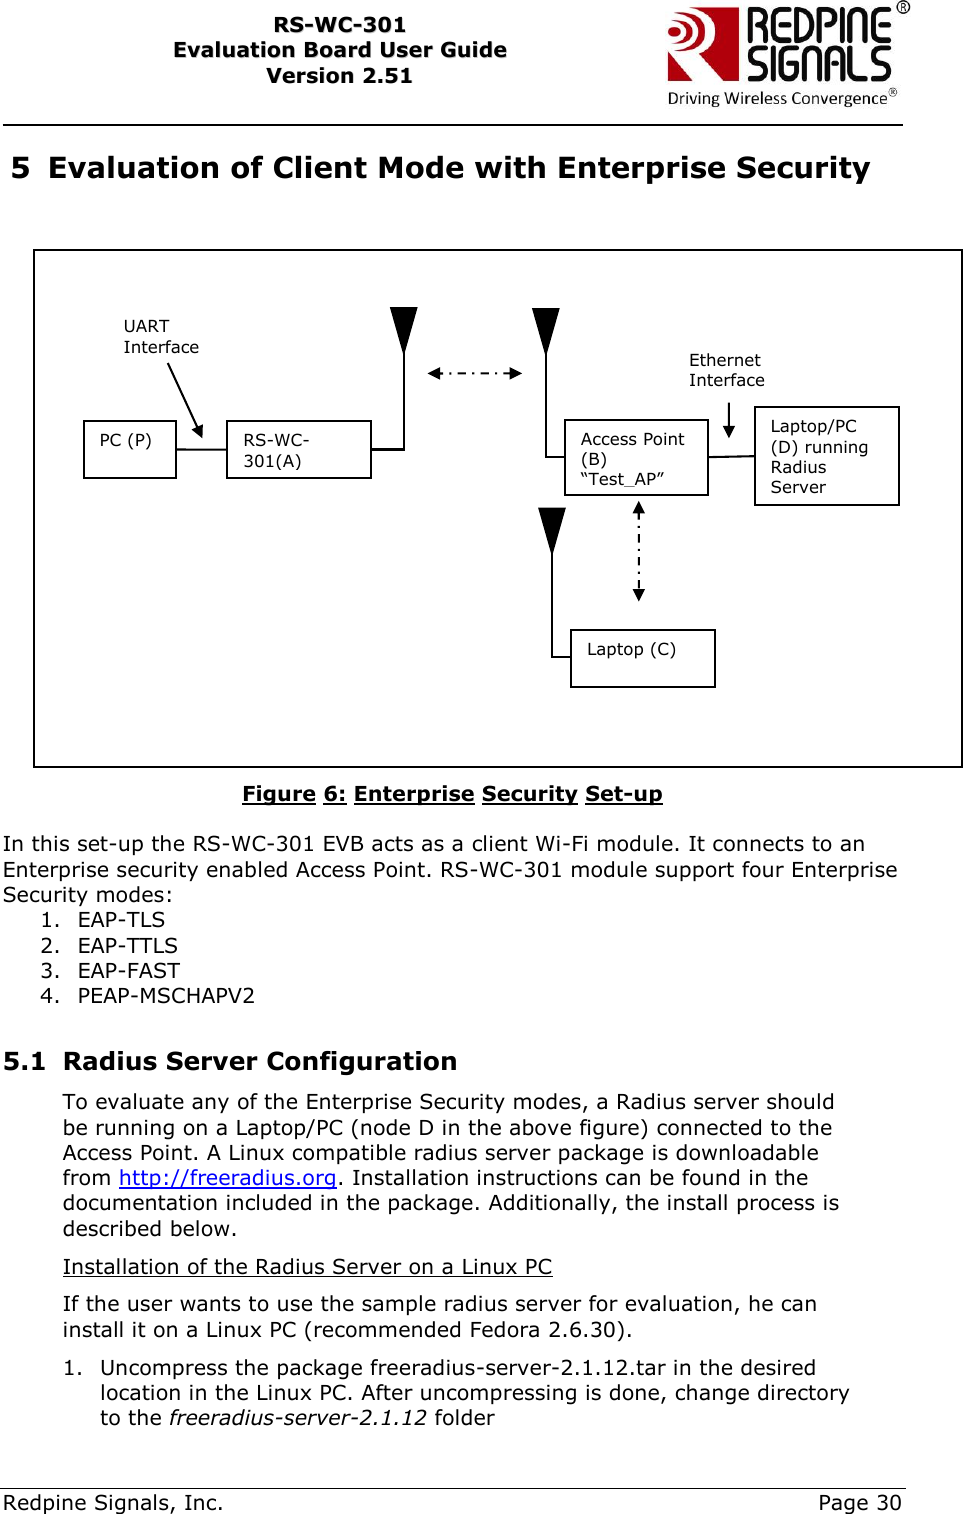     Redpine Signals, Inc.     Page 30 RRSS--WWCC--330011    EEvvaalluuaattiioonn  BBooaarrdd  UUsseerr  GGuuiiddee  VVeerrssiioonn  22..5511    5 Evaluation of Client Mode with Enterprise Security   Figure 6: Enterprise Security Set-up  In this set-up the RS-WC-301 EVB acts as a client Wi-Fi module. It connects to an Enterprise security enabled Access Point. RS-WC-301 module support four Enterprise Security modes: 1. EAP-TLS 2. EAP-TTLS 3. EAP-FAST 4. PEAP-MSCHAPV2  5.1 Radius Server Configuration  To evaluate any of the Enterprise Security modes, a Radius server should be running on a Laptop/PC (node D in the above figure) connected to the Access Point. A Linux compatible radius server package is downloadable from http://freeradius.org. Installation instructions can be found in the documentation included in the package. Additionally, the install process is described below. Installation of the Radius Server on a Linux PC If the user wants to use the sample radius server for evaluation, he can install it on a Linux PC (recommended Fedora 2.6.30). 1. Uncompress the package freeradius-server-2.1.12.tar in the desired location in the Linux PC. After uncompressing is done, change directory to the freeradius-server-2.1.12 folder PC (P) RS-WC-301(A) UART Interface Laptop/PC (D) running Radius Server Access Point (B) “Test_AP” Ethernet  Interface Laptop (C) 